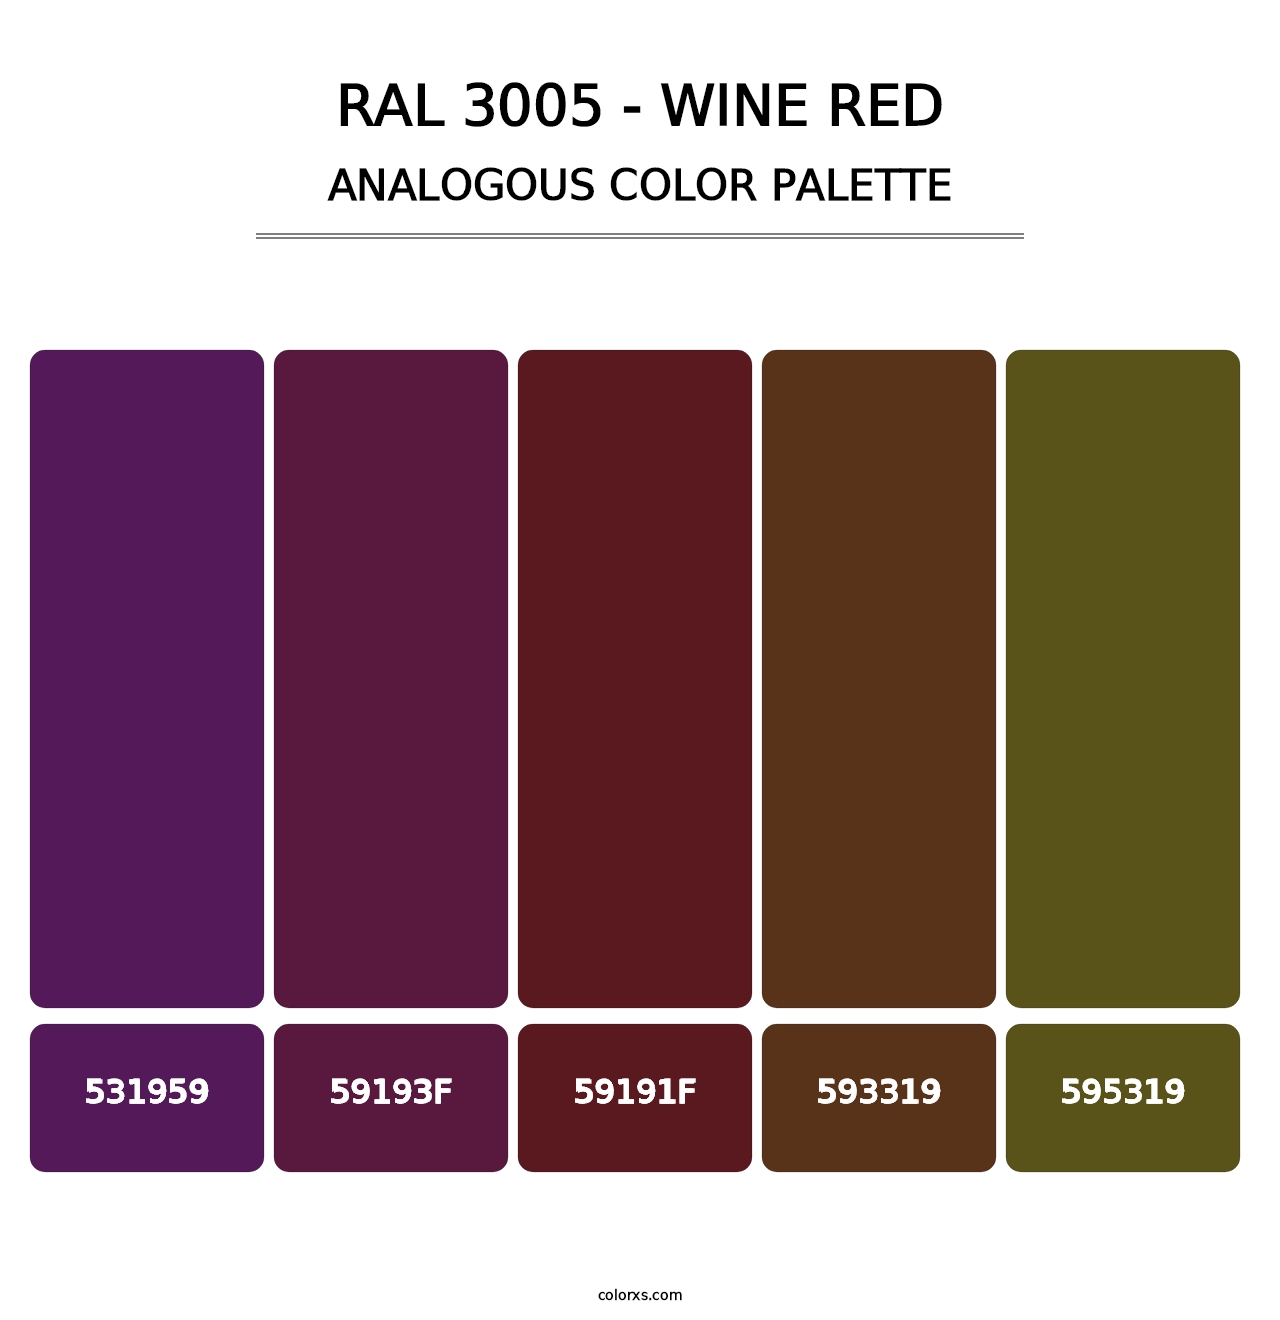 RAL 3005 - Wine Red - Analogous Color Palette